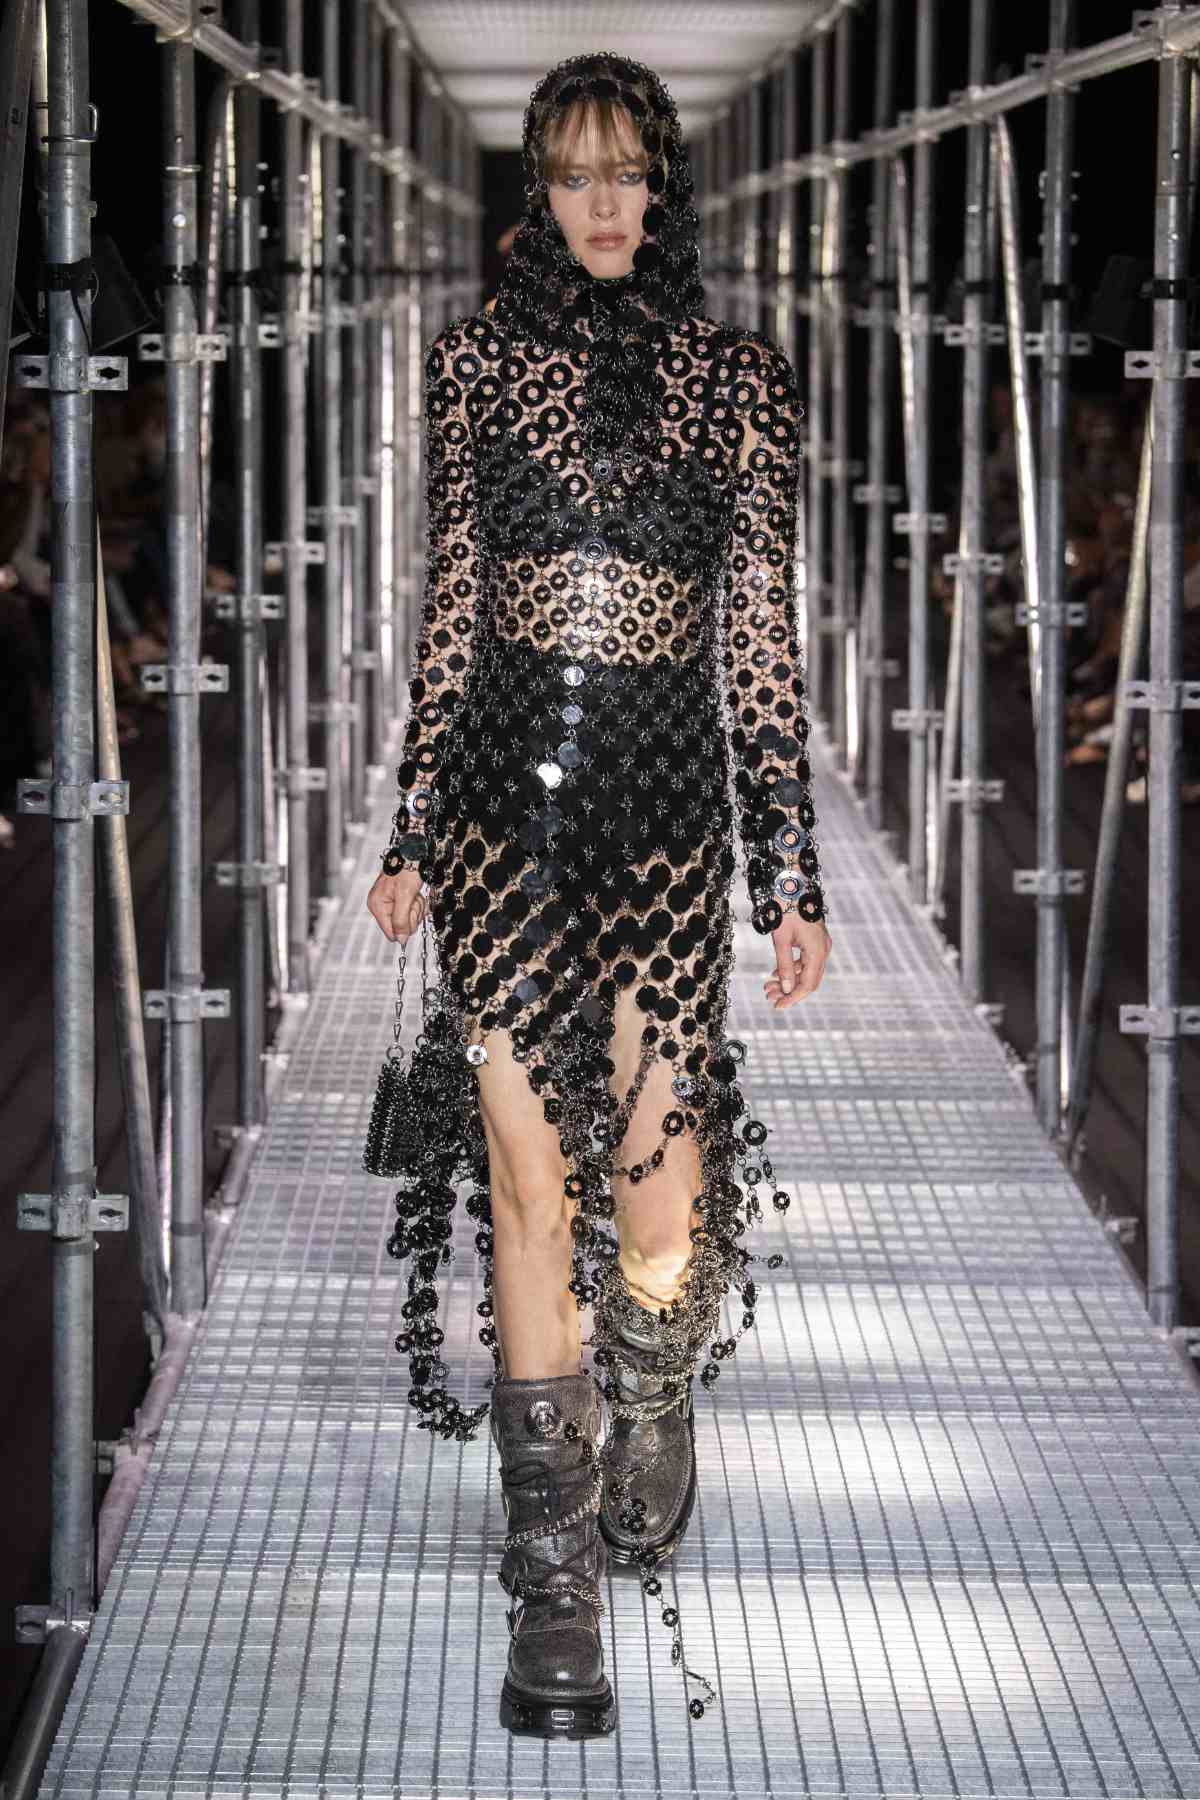 Paco Rabanne Presents Its New Spring Summer 2023 Collection: On A Mission